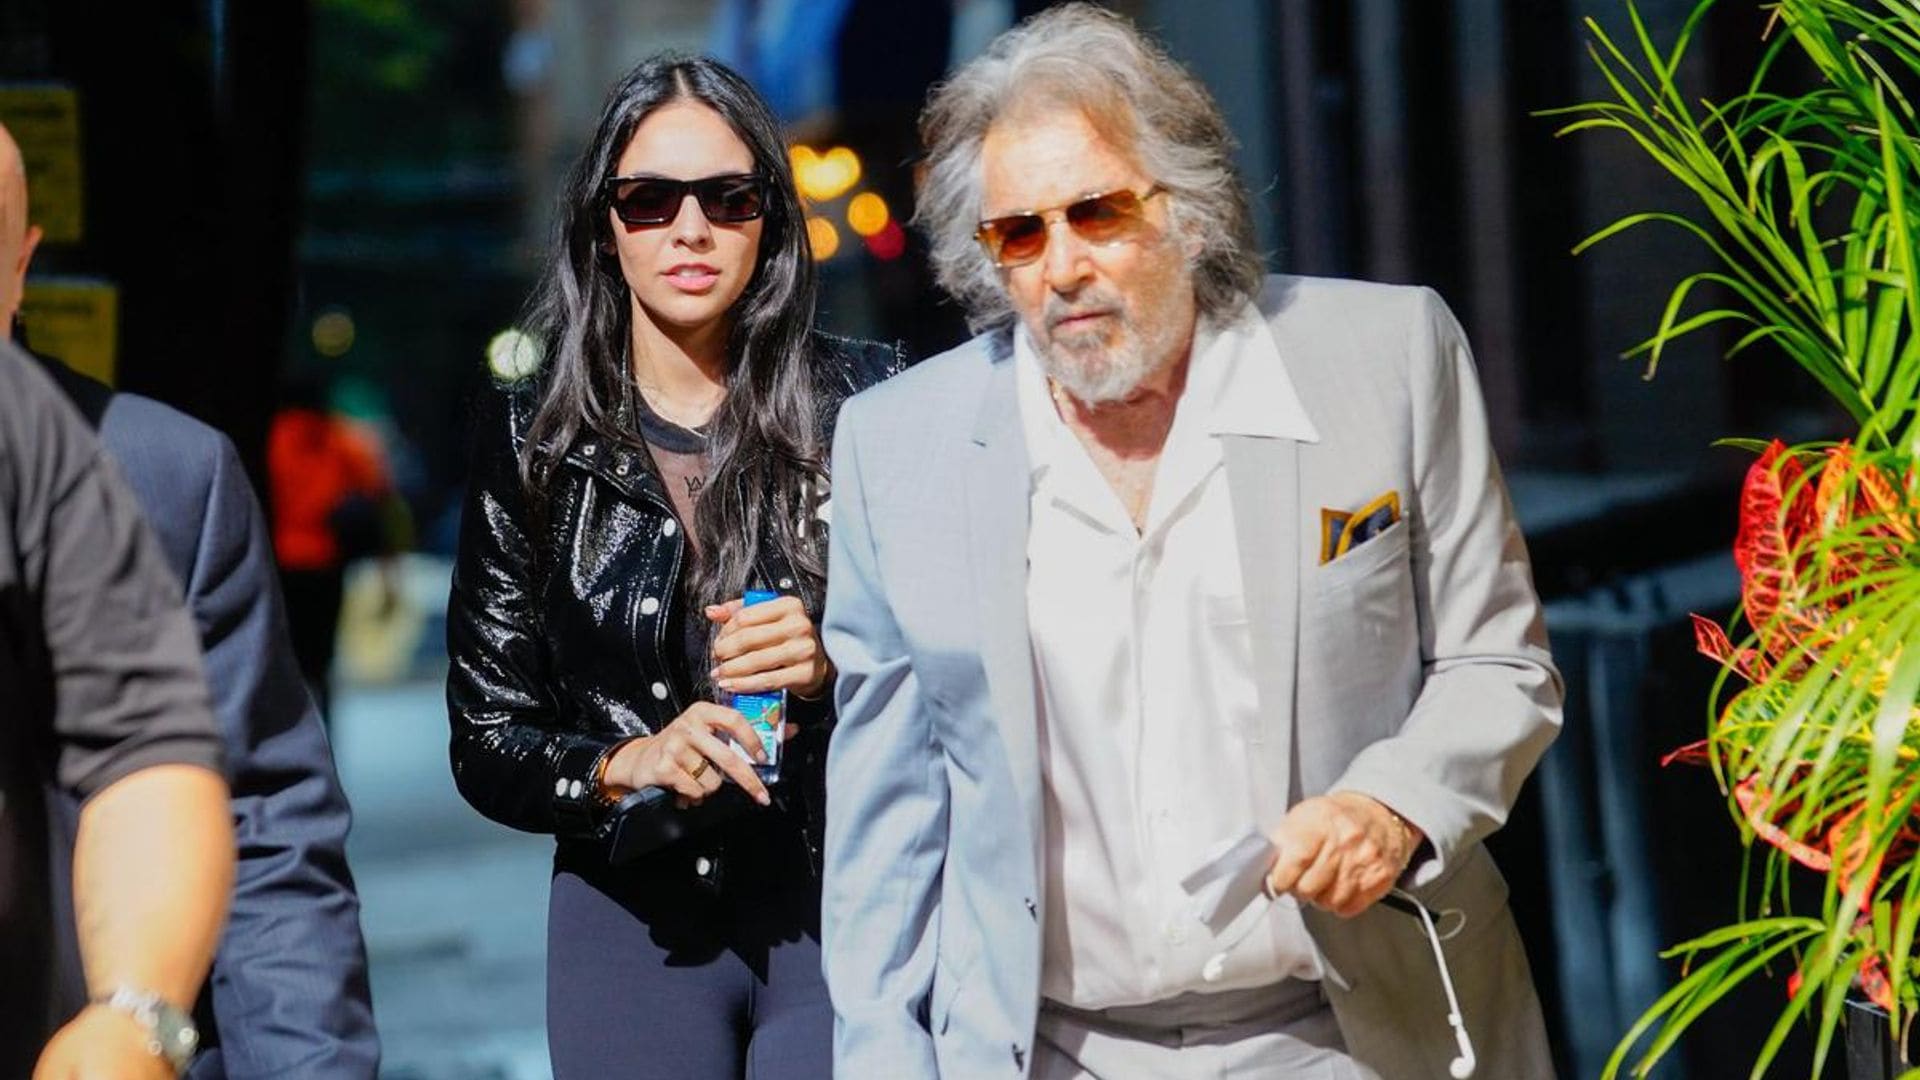 Al Pacino’s girlfriend Noor Alfallah opened up about the illness she battled during her pregnancy